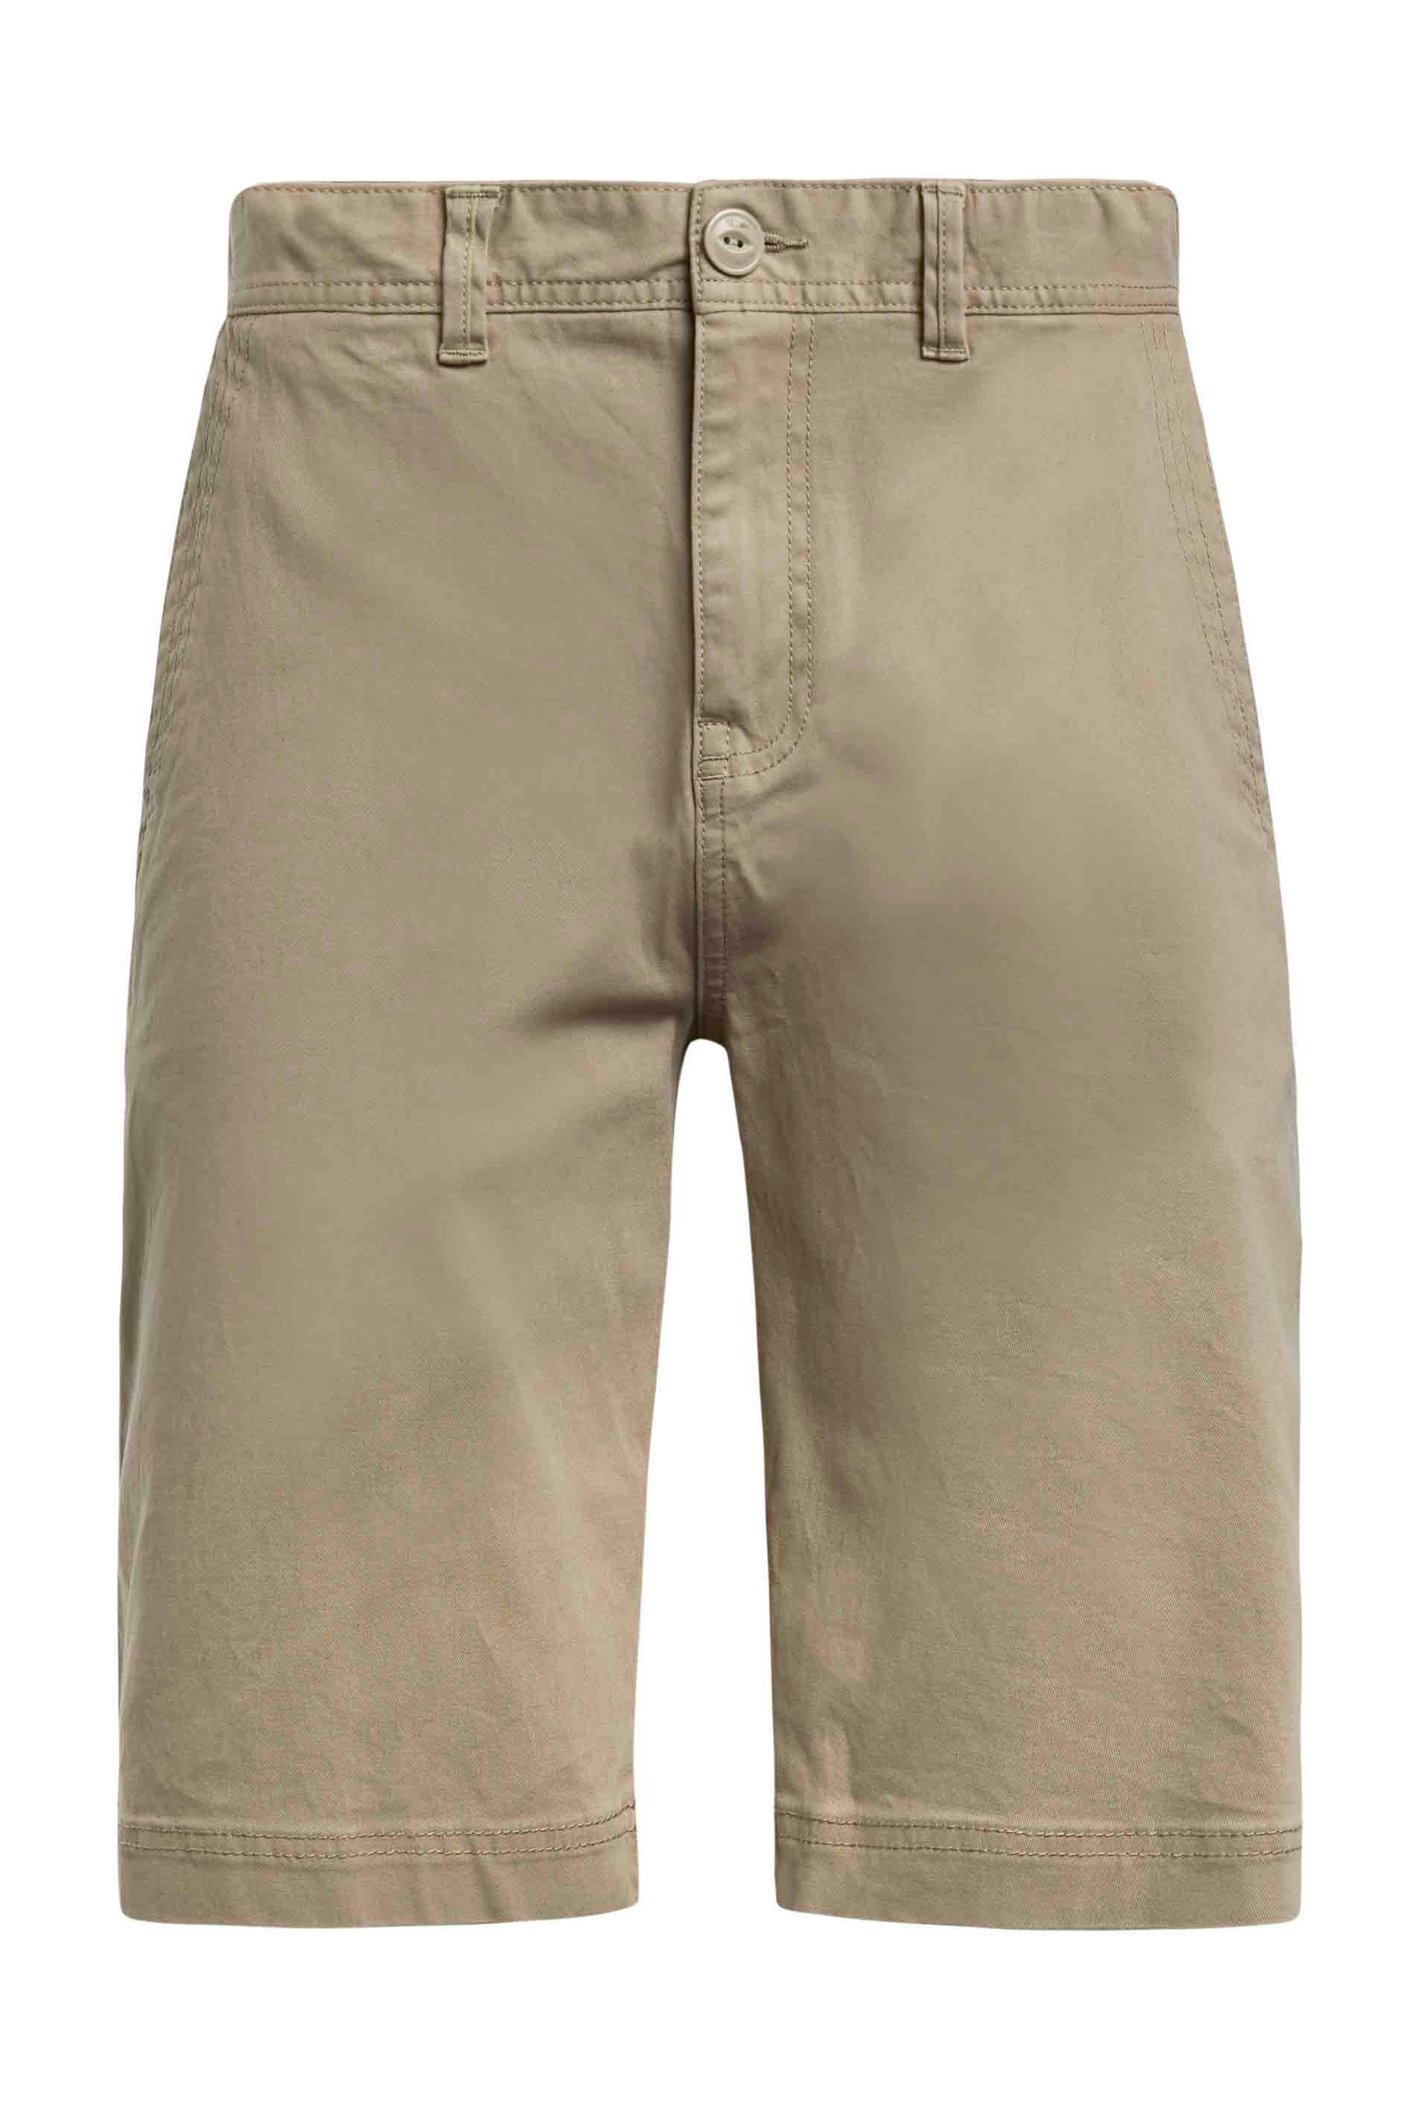 Weird Fish Rayburn Flat Front Shorts Taupe Grey Size 30